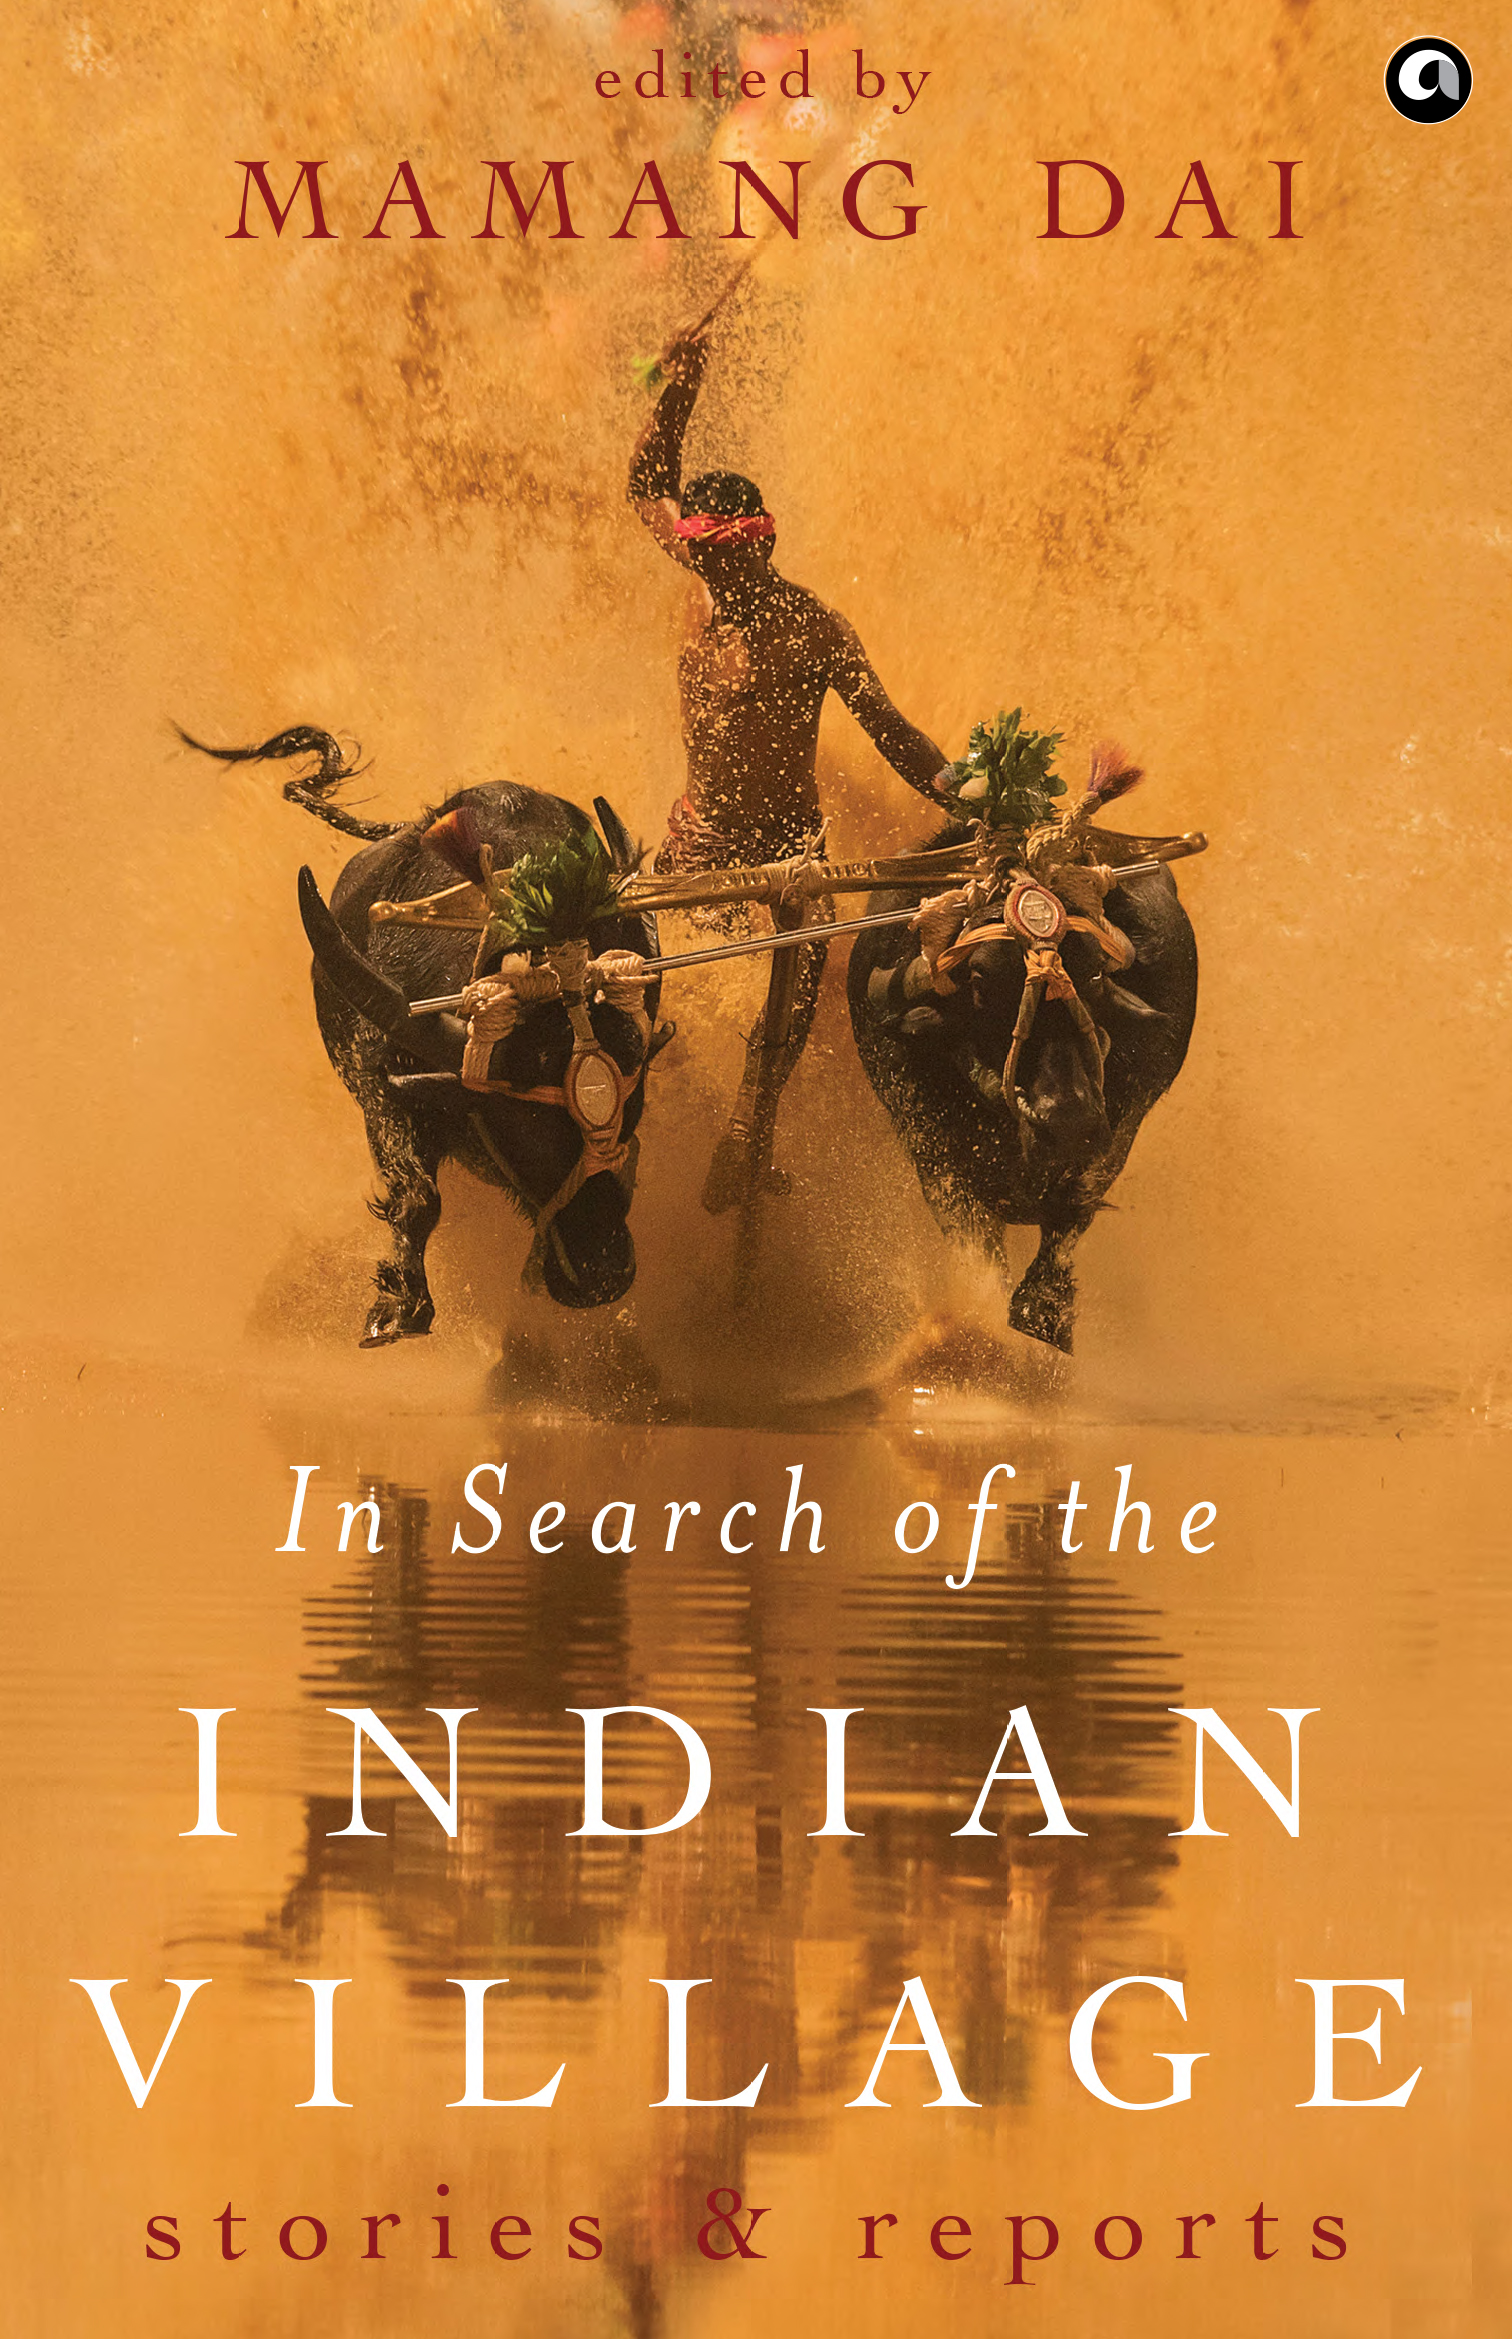 In Search of the Indian Village: Stories and Reports